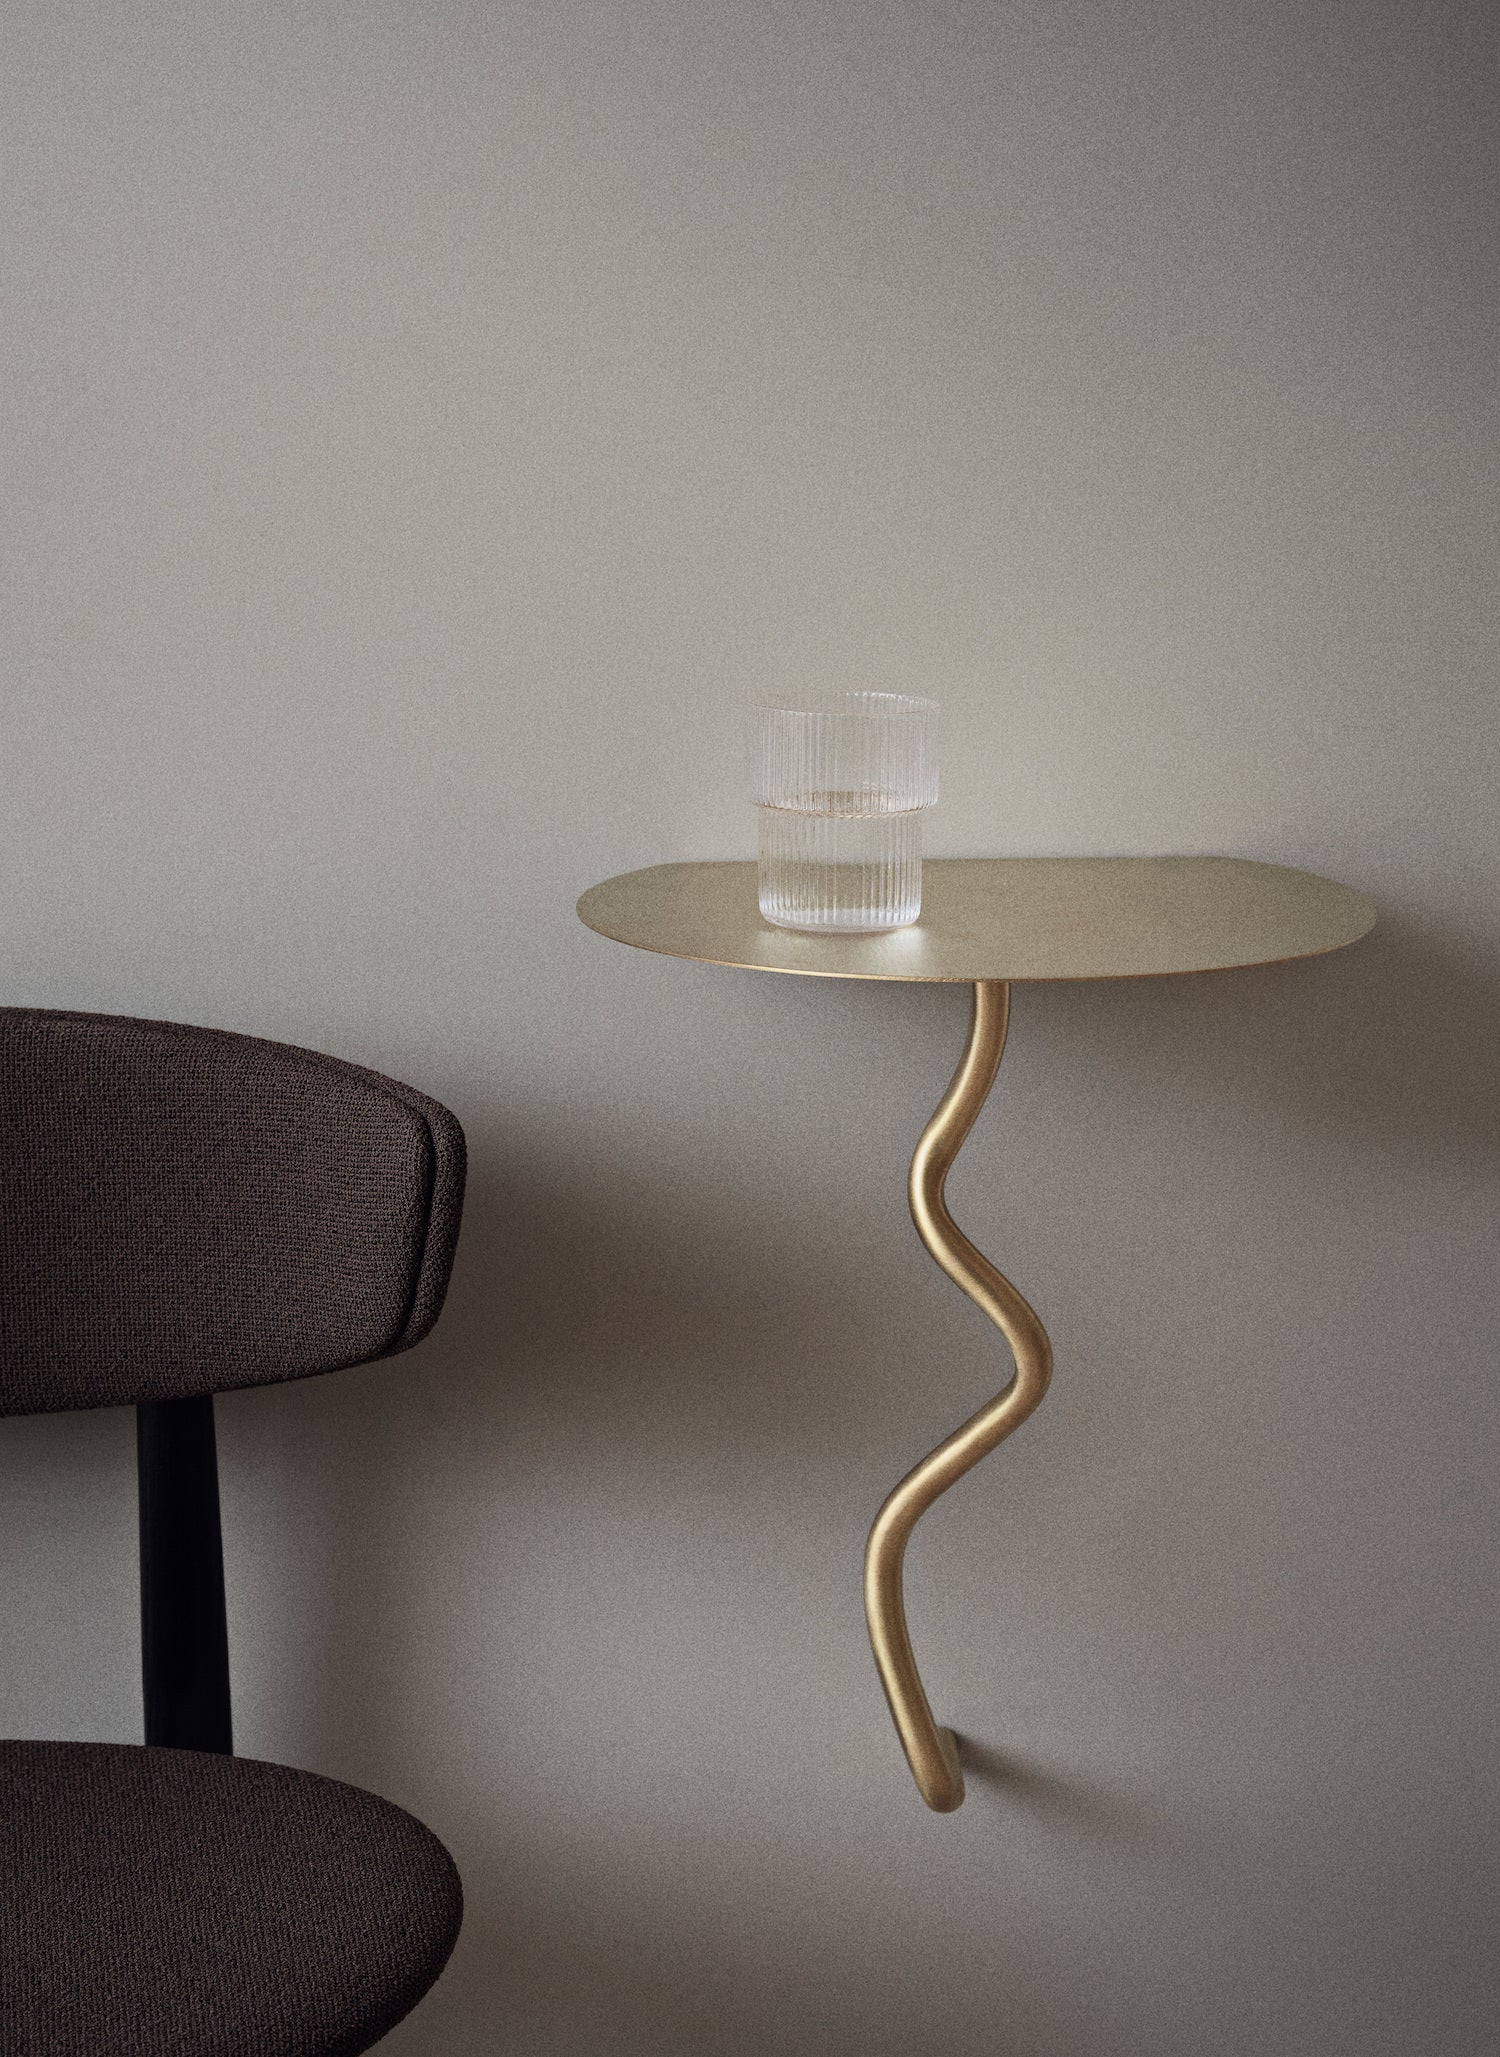 Curvature Wall Table. Inspired by jewelry, the Curvature Wall Table presents a decorative surface ideal for use in smaller spaces. 